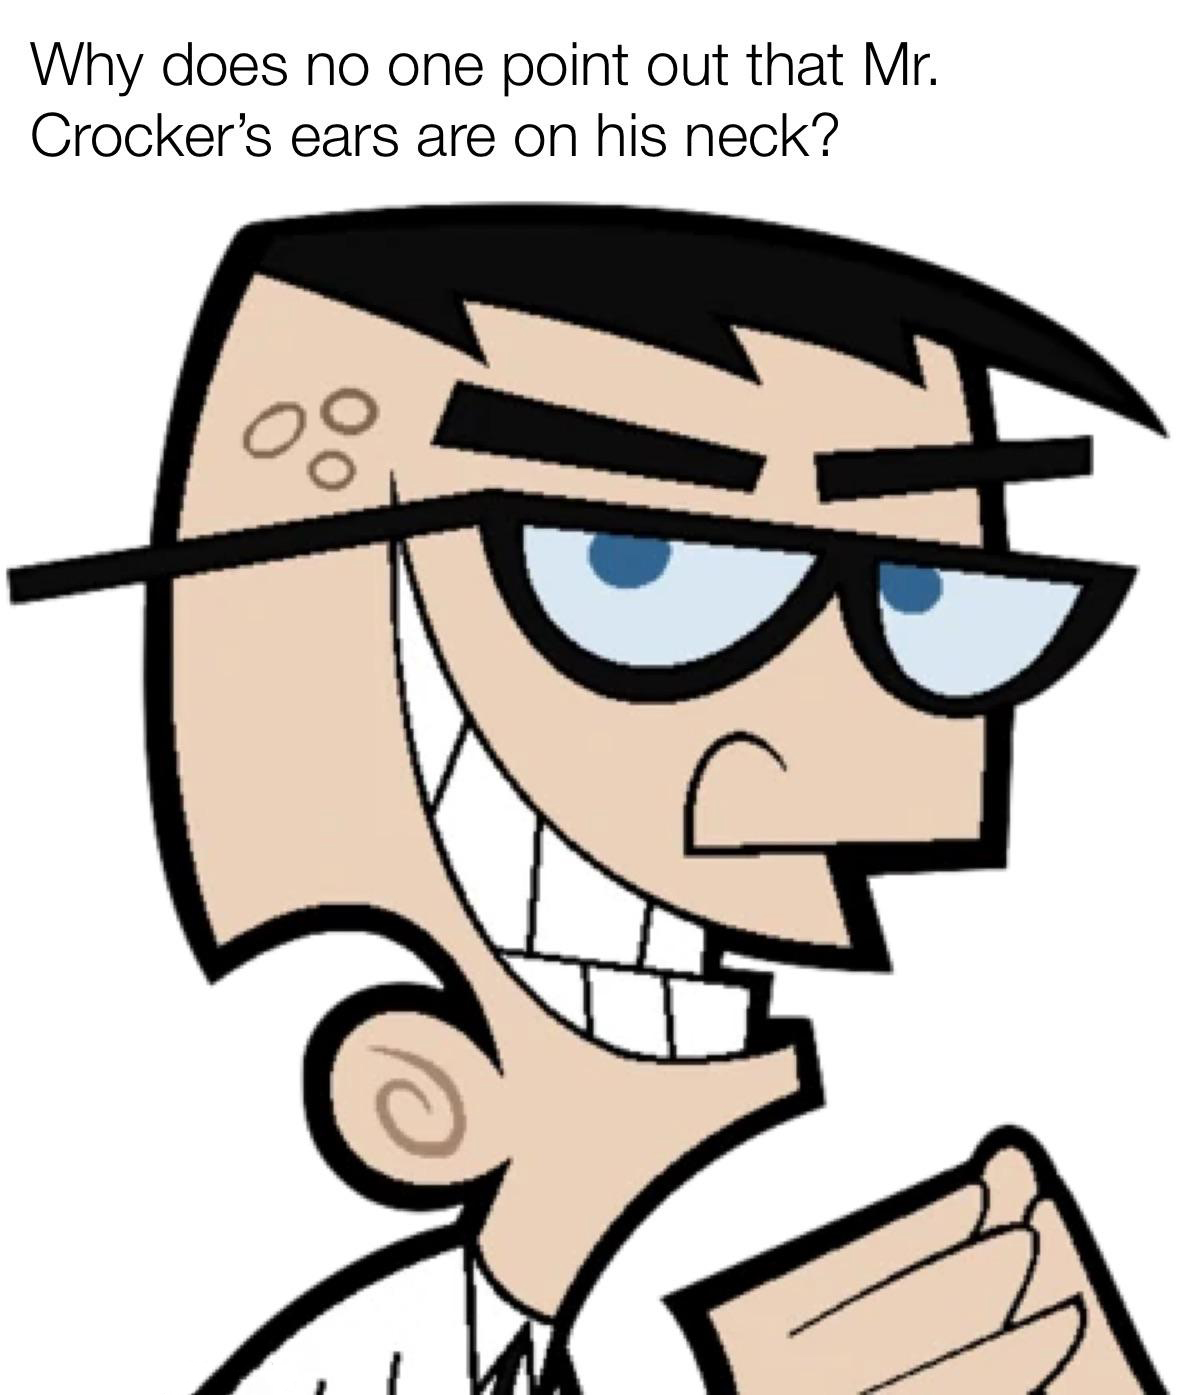 dank memes and funny pics - denzel crocker - Why does no one point out that Mr. Crocker's ears are on his neck?